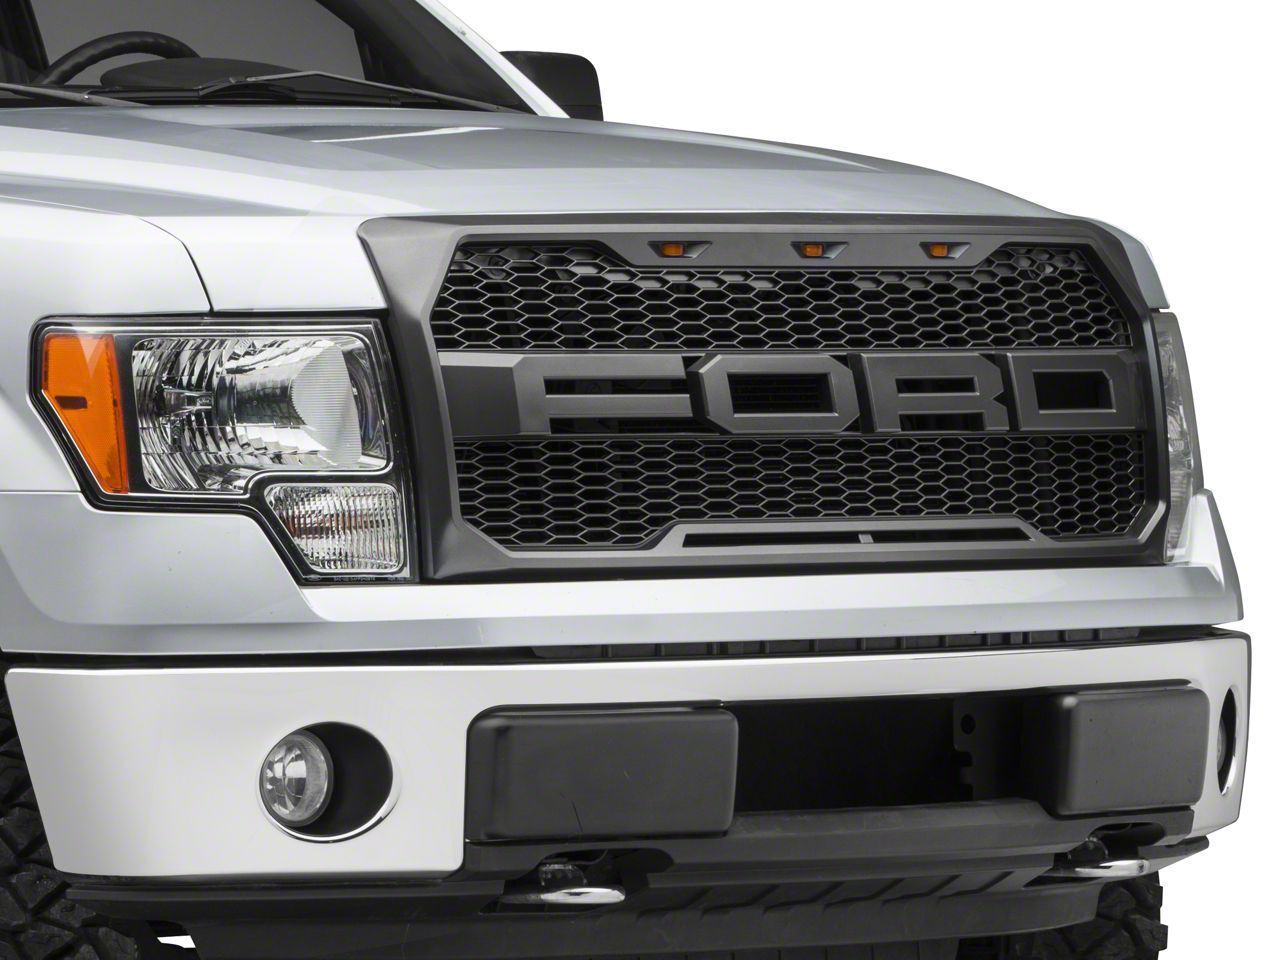 Grille Not Included 3Pcs Front Grille Led Lights Trim Replacement for F150 F250 Raptor Style External White Grill Lamps Accessories for 2004-2014 &2014-up